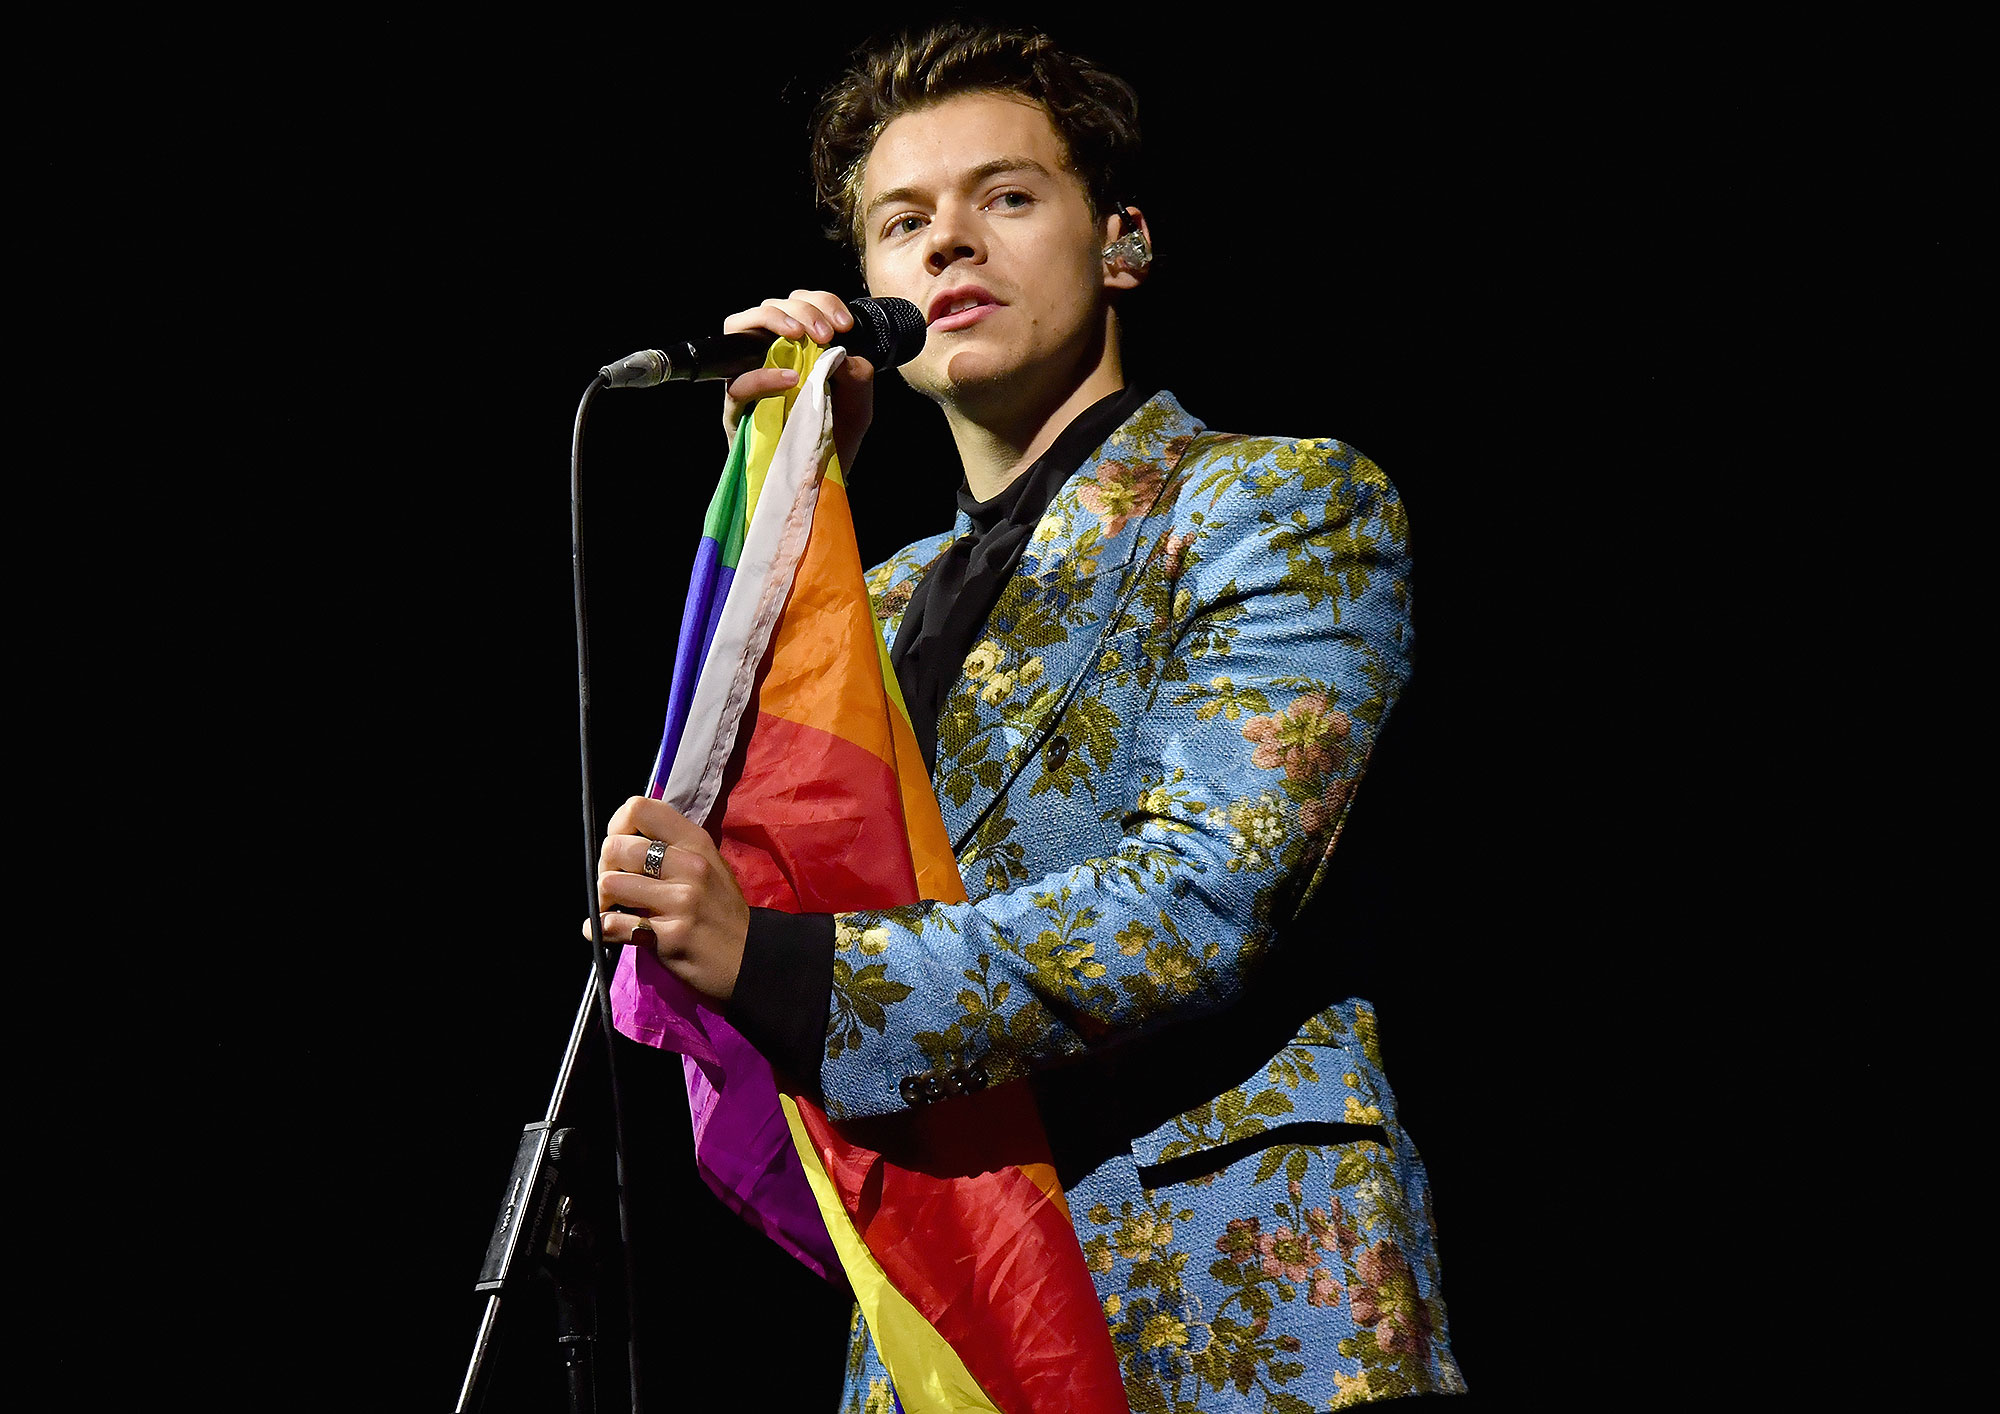 LOS ANGELES, CA - SEPTEMBER 20:  Harry Styles performs onstage at The Greek Theatre on September 20, 2017 in Los Angeles, California.  (Photo by Jeff Kravitz/FilmMagic for Sony Music)